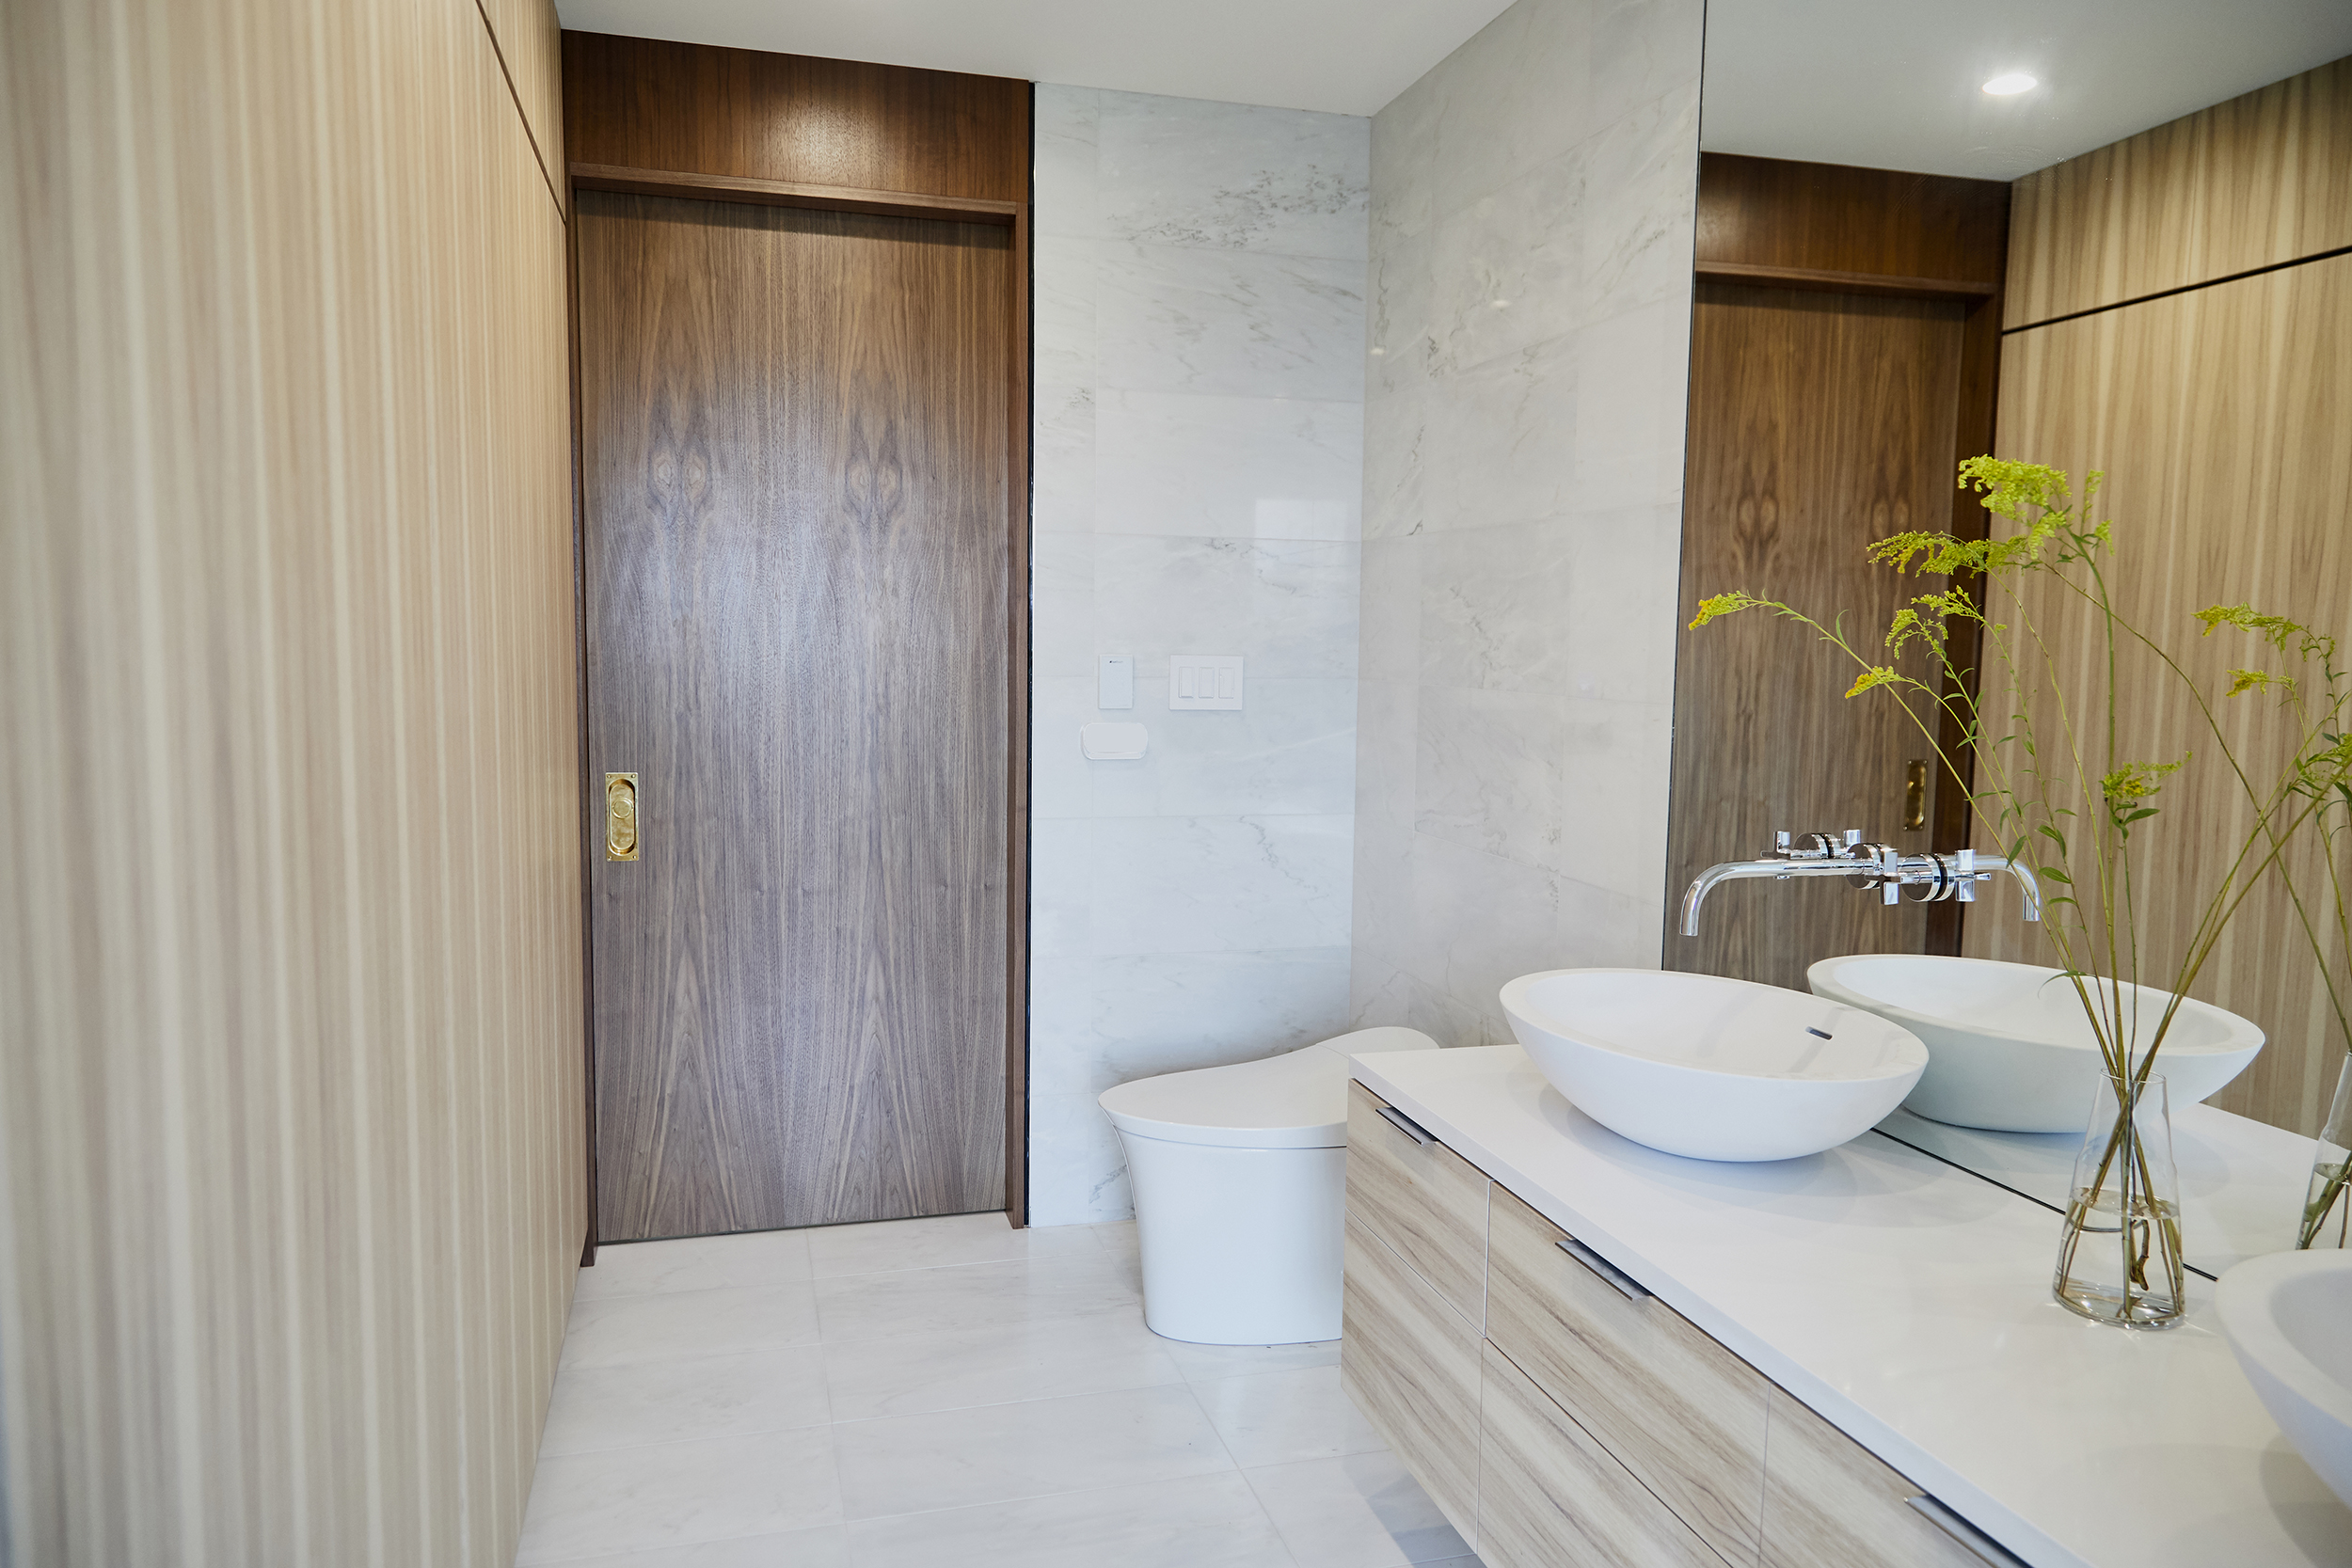 Local materials were selected throughout the house interior, here in the master ensuite pecan/hickory was chosen for the vanity and domestically quarried white marble for floors and walls